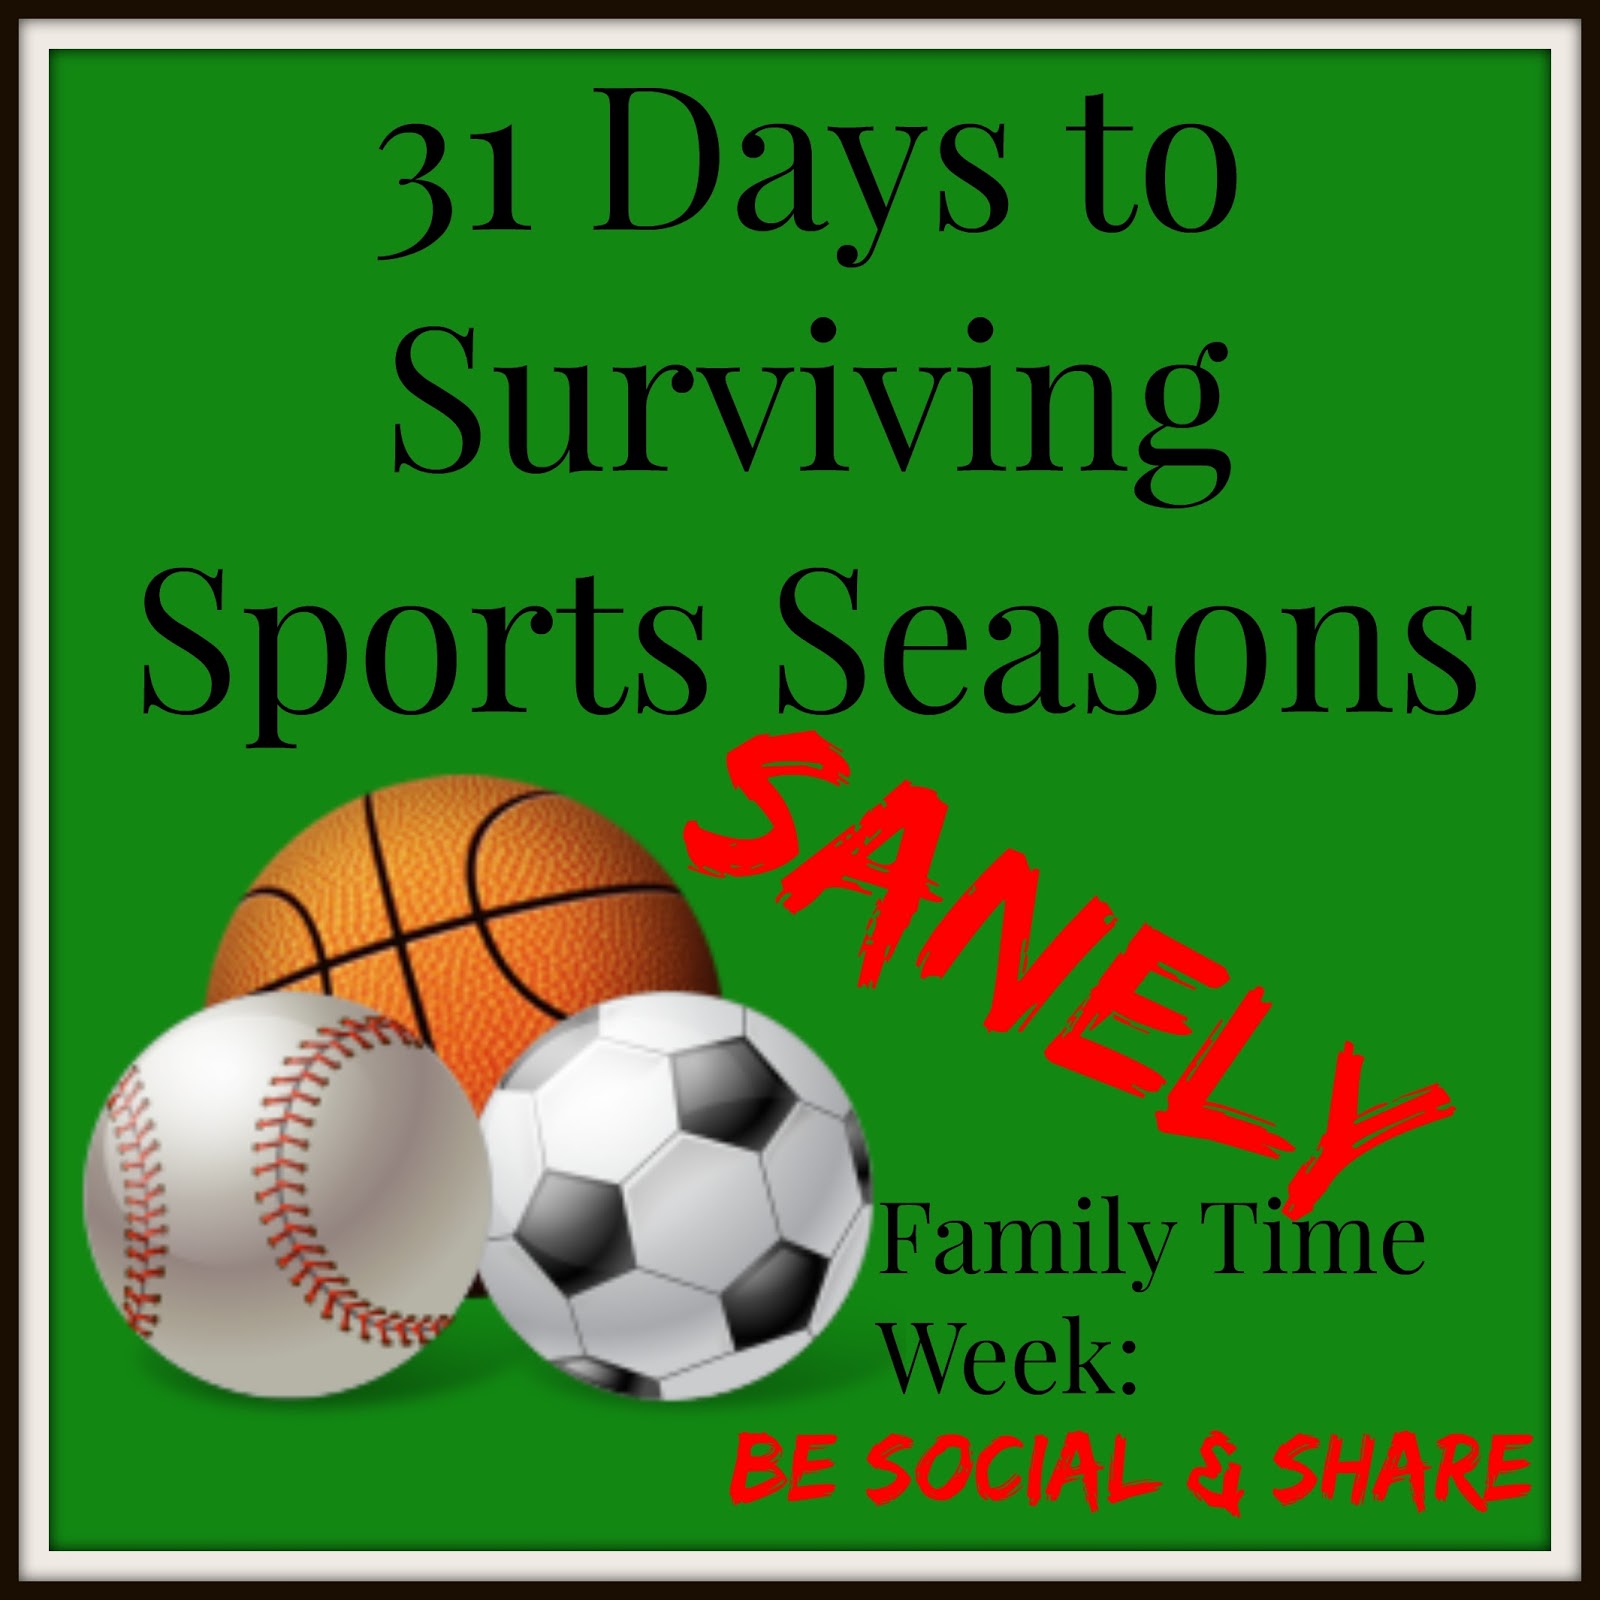 31 Days to Surviving Sports Seasons Sanely: Be Social and Share